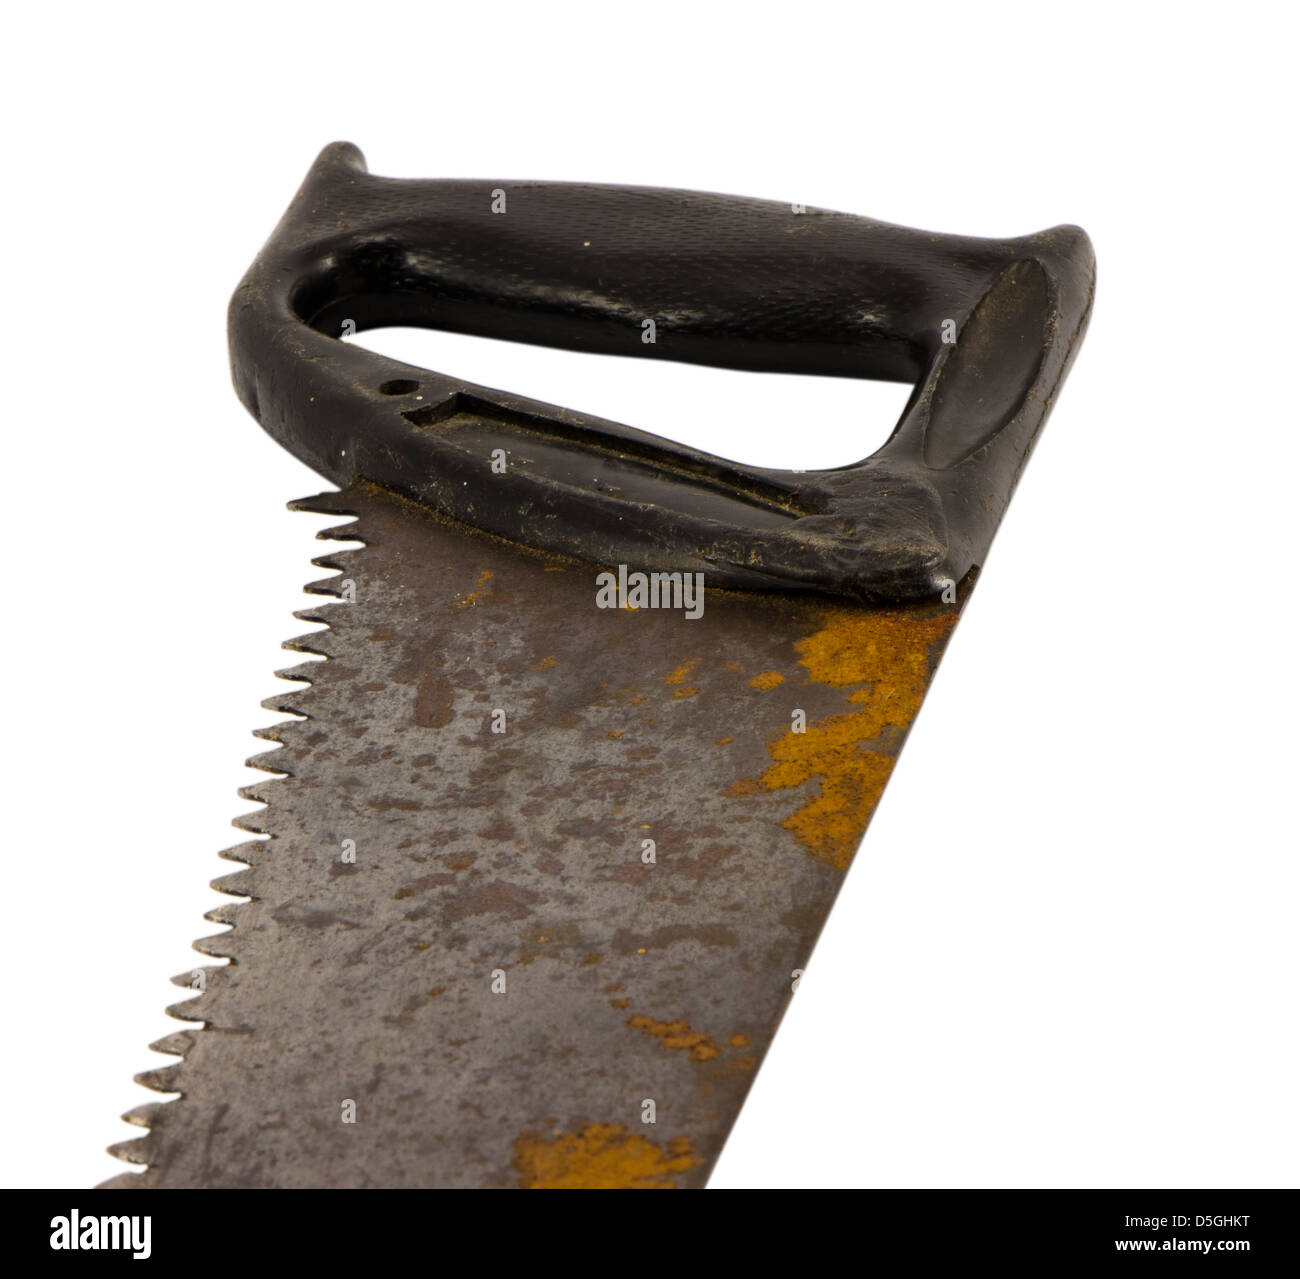 retro rusty hand saw handsaw tool with plastic handle isolated on white background Stock Photo